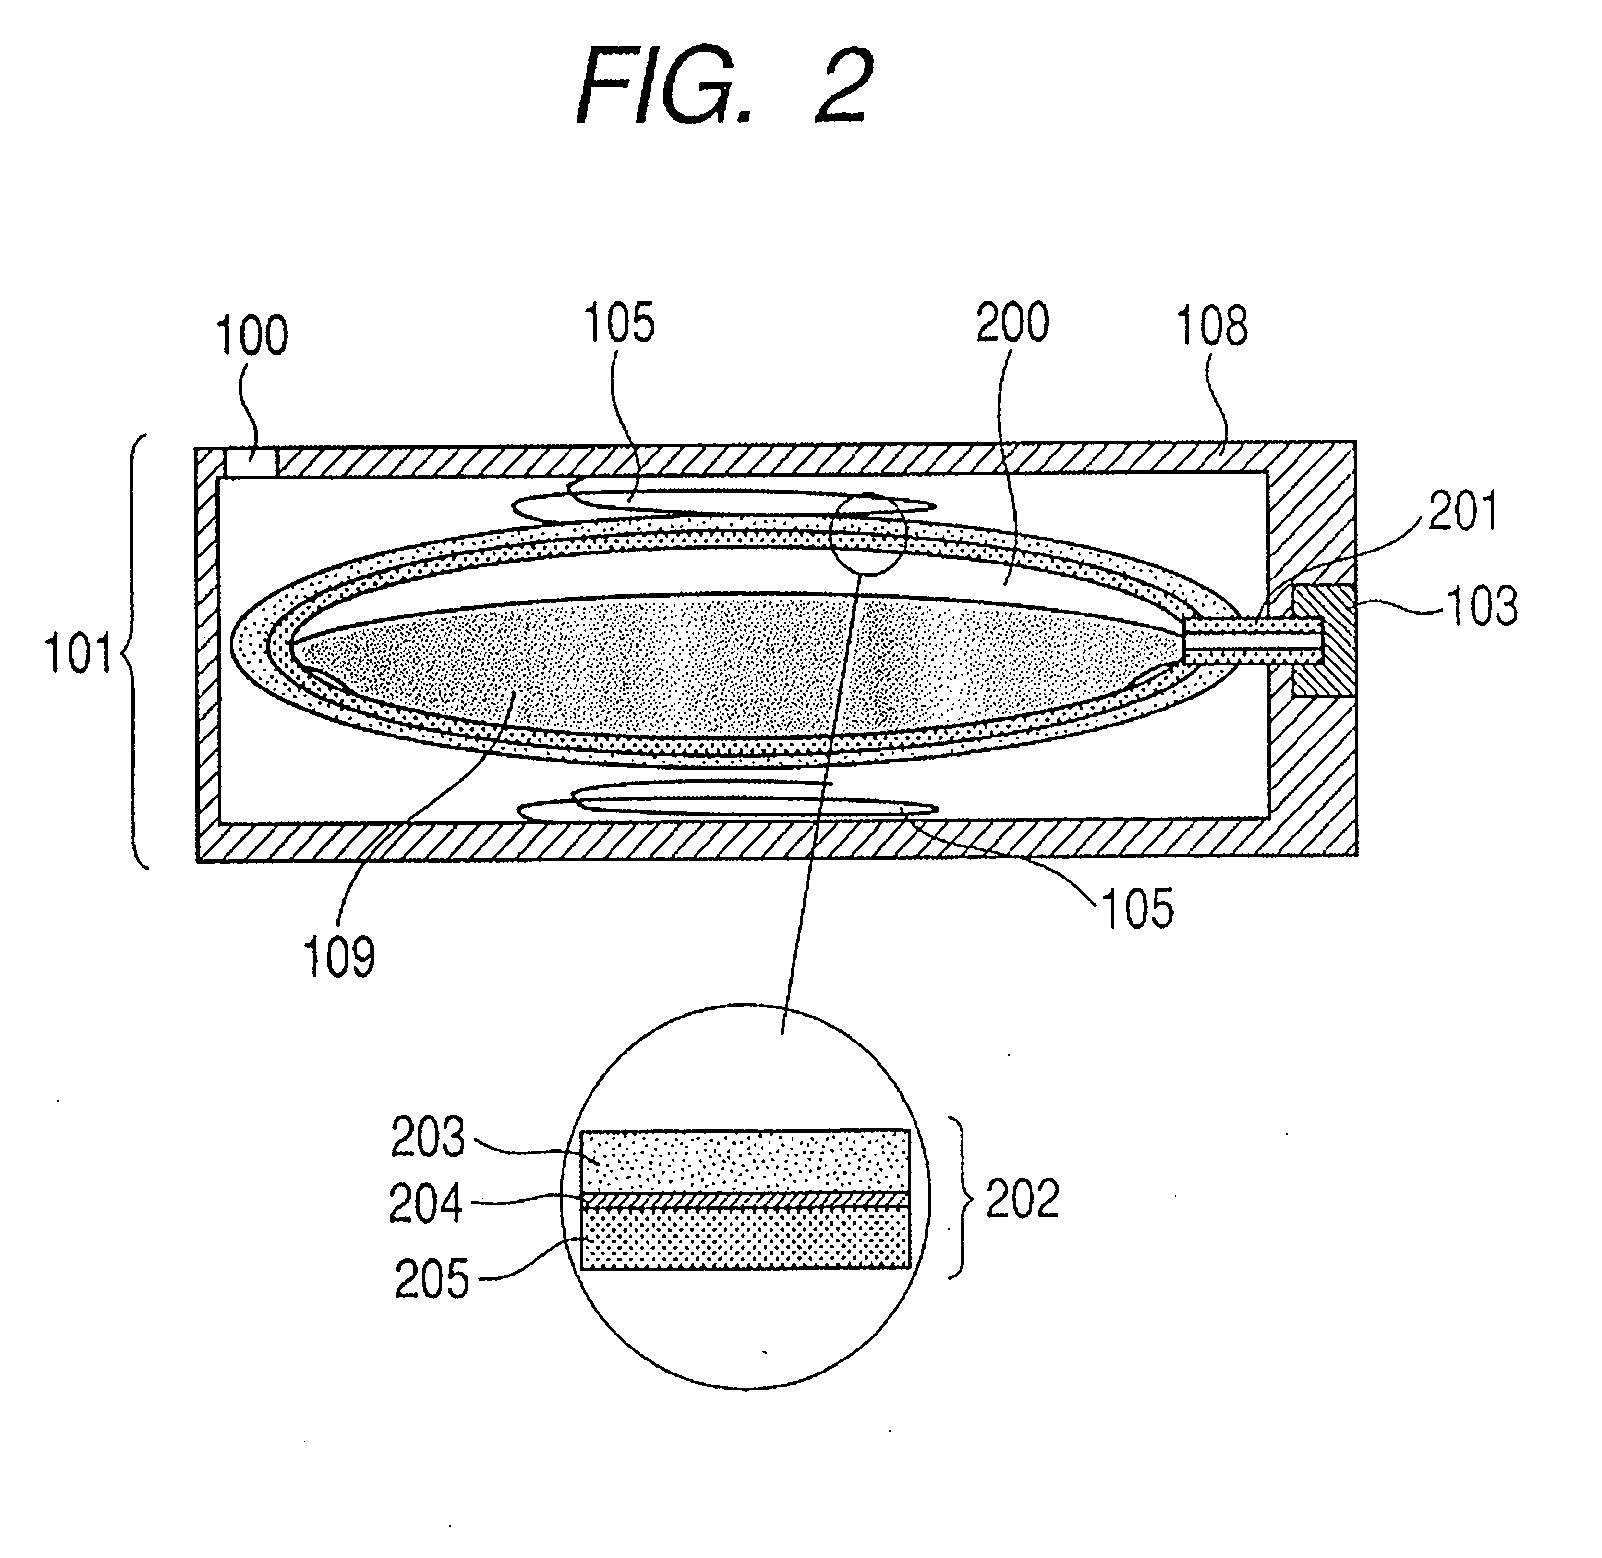 Ink tank for ink jet recording device